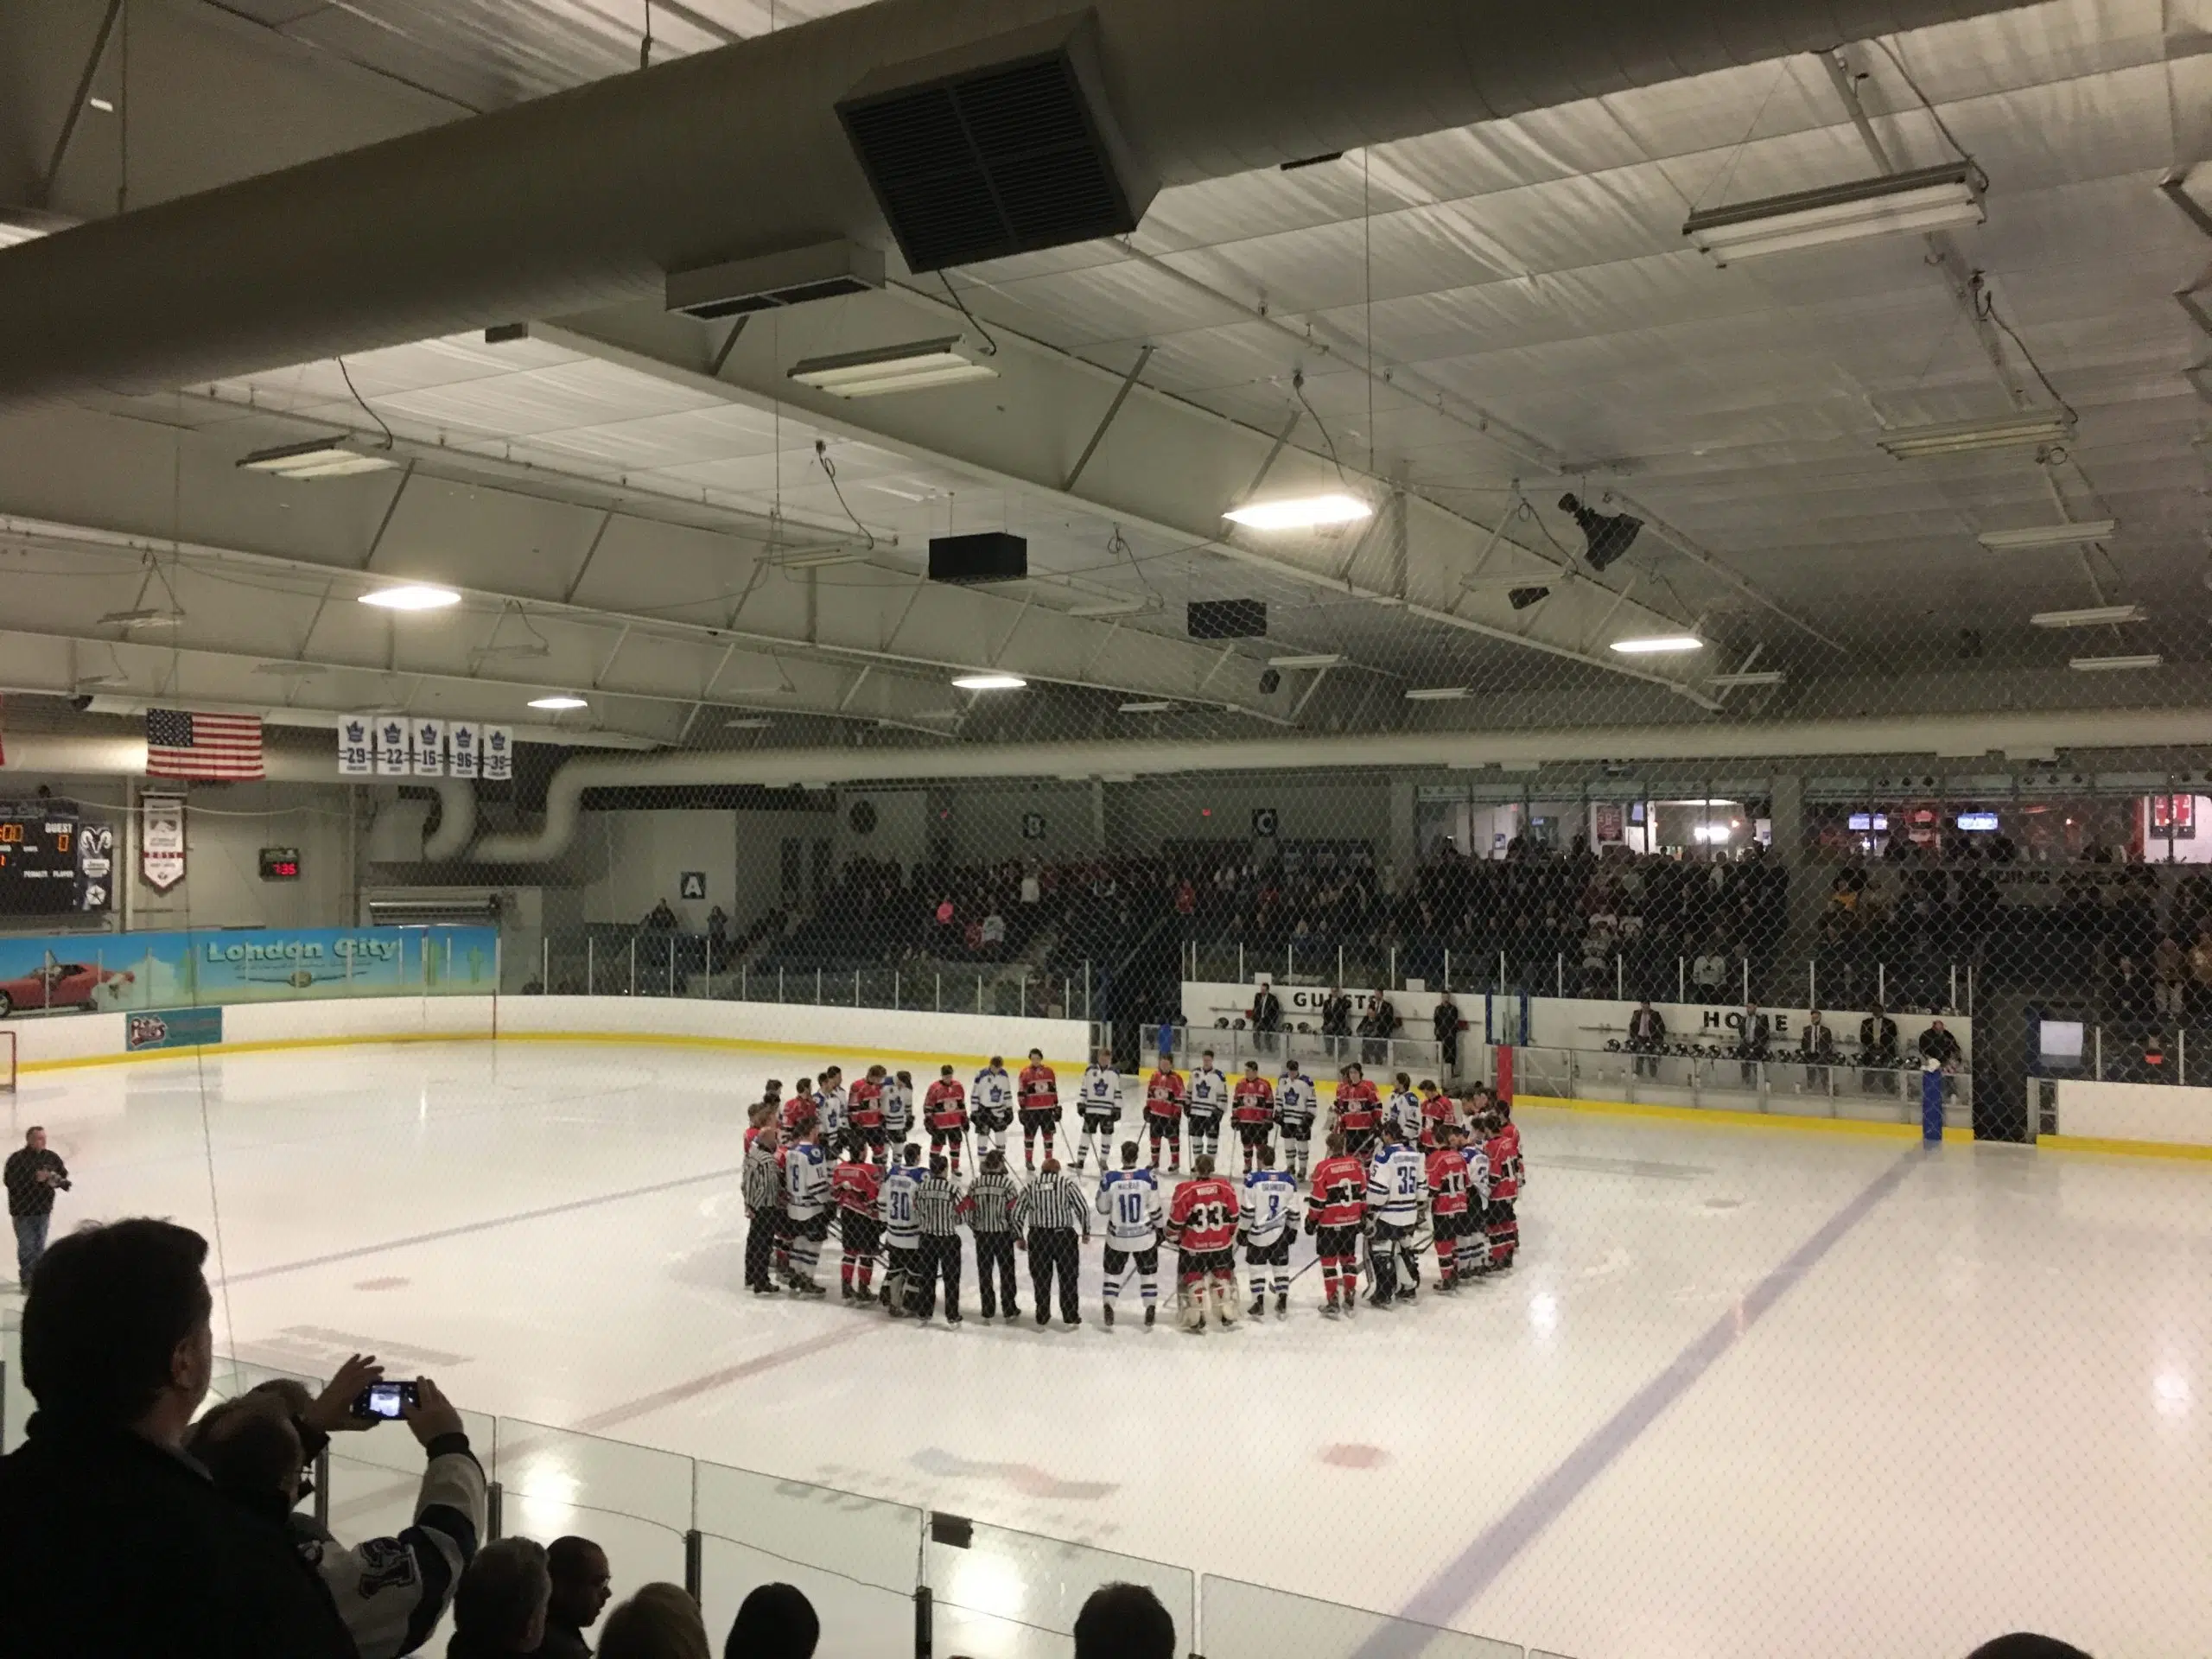 More than a game: how Humboldt affects a larger community